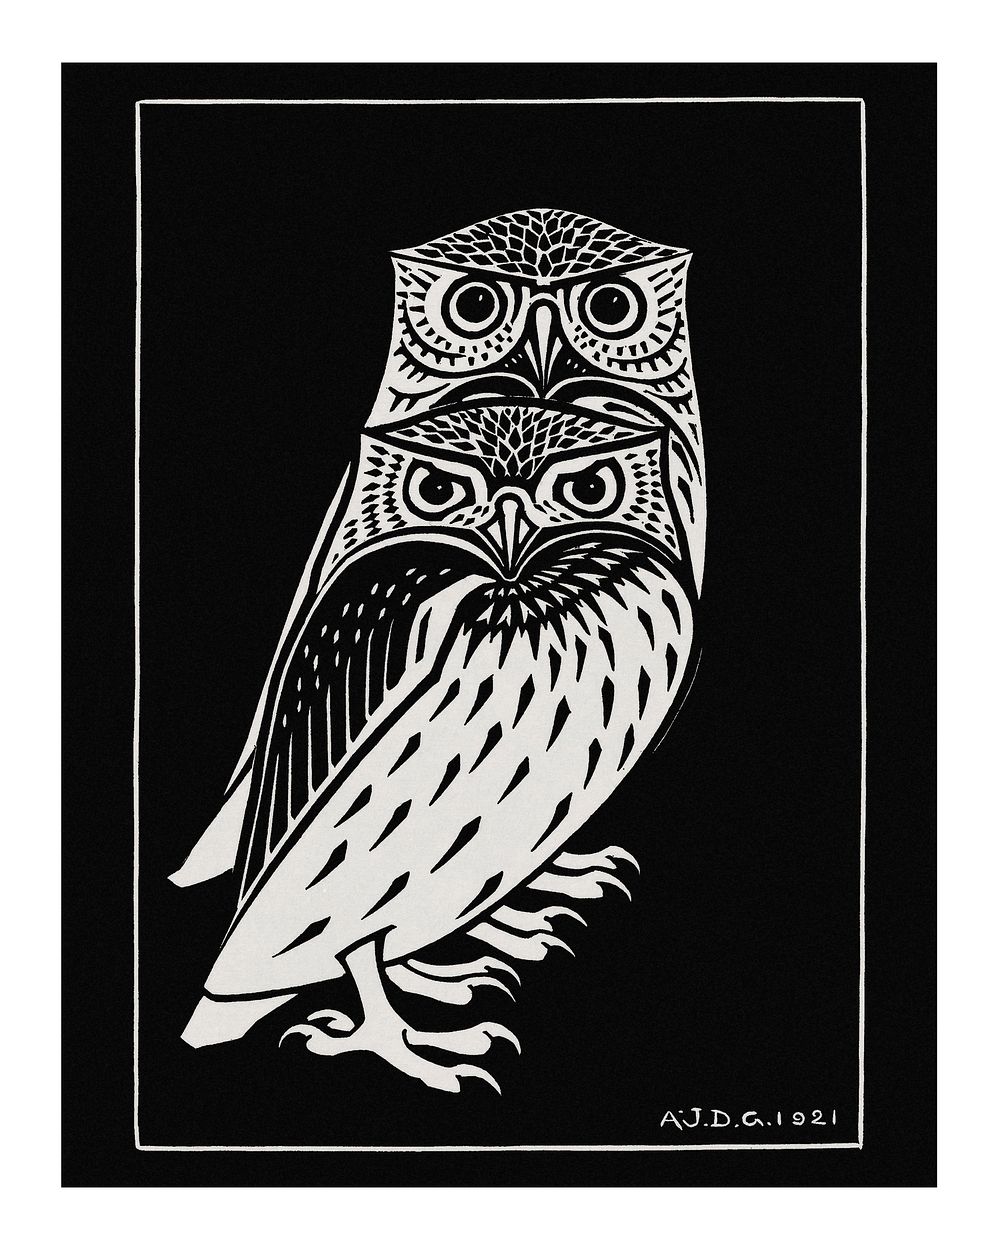 Two owls vintage illustration wall art print and poster design remix from original artwork.